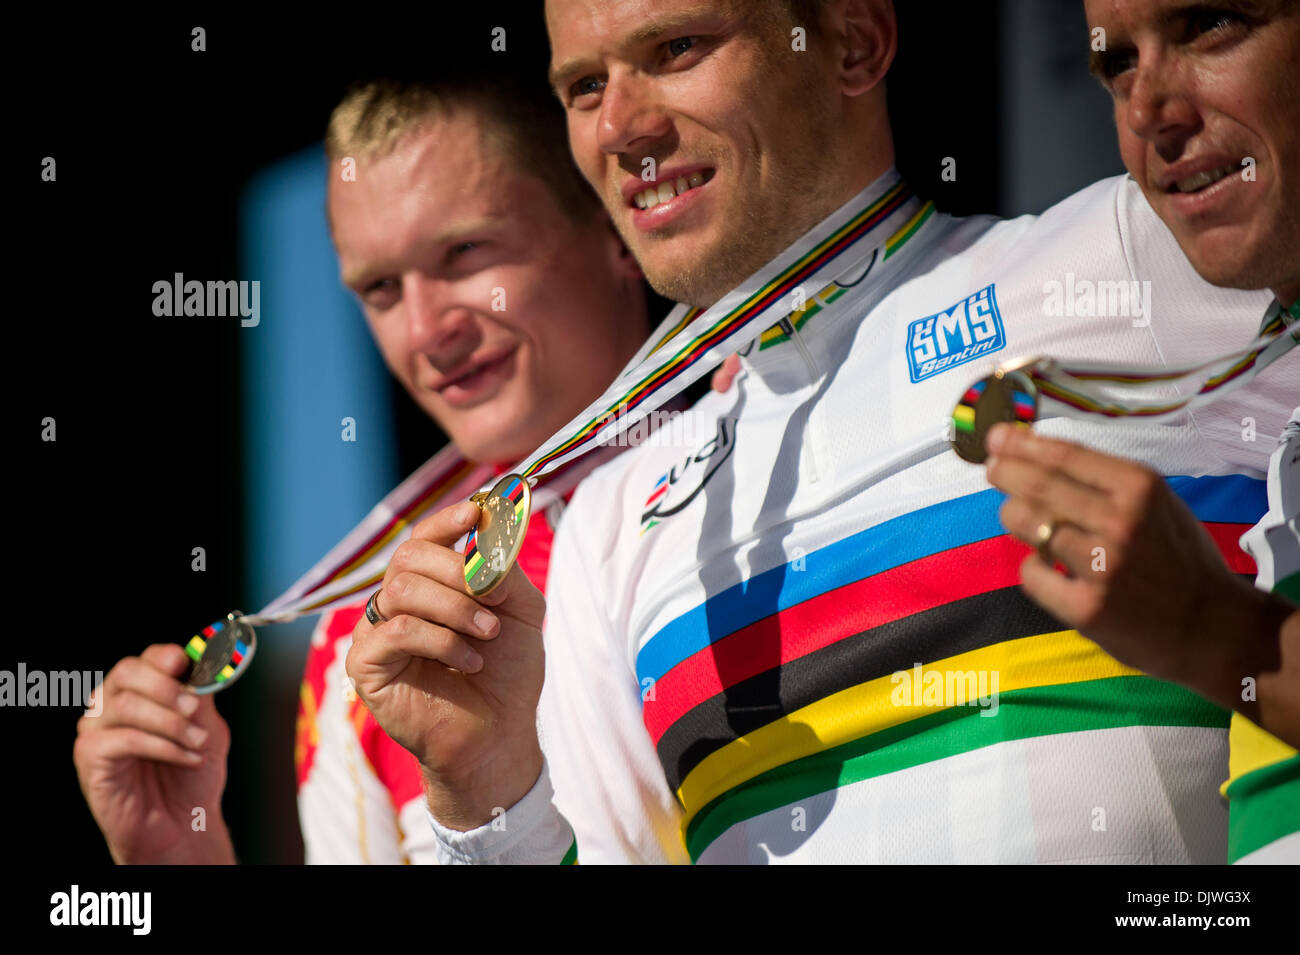 Oct. 3, 2010 - Geelong, Victoria, Australia - The medalists show off their medals (L to R) Matti Breschel (DEN) silver, Thor Hushovd (NOR) gold, and Allan Davis (AUS) bronze at the 2010 UCI Road World Championships Elite Men Road Race in Geelong, Victoria, Australia. (Credit Image: © Sydney Low/Southcreek Global/ZUMApress.com) Stock Photo